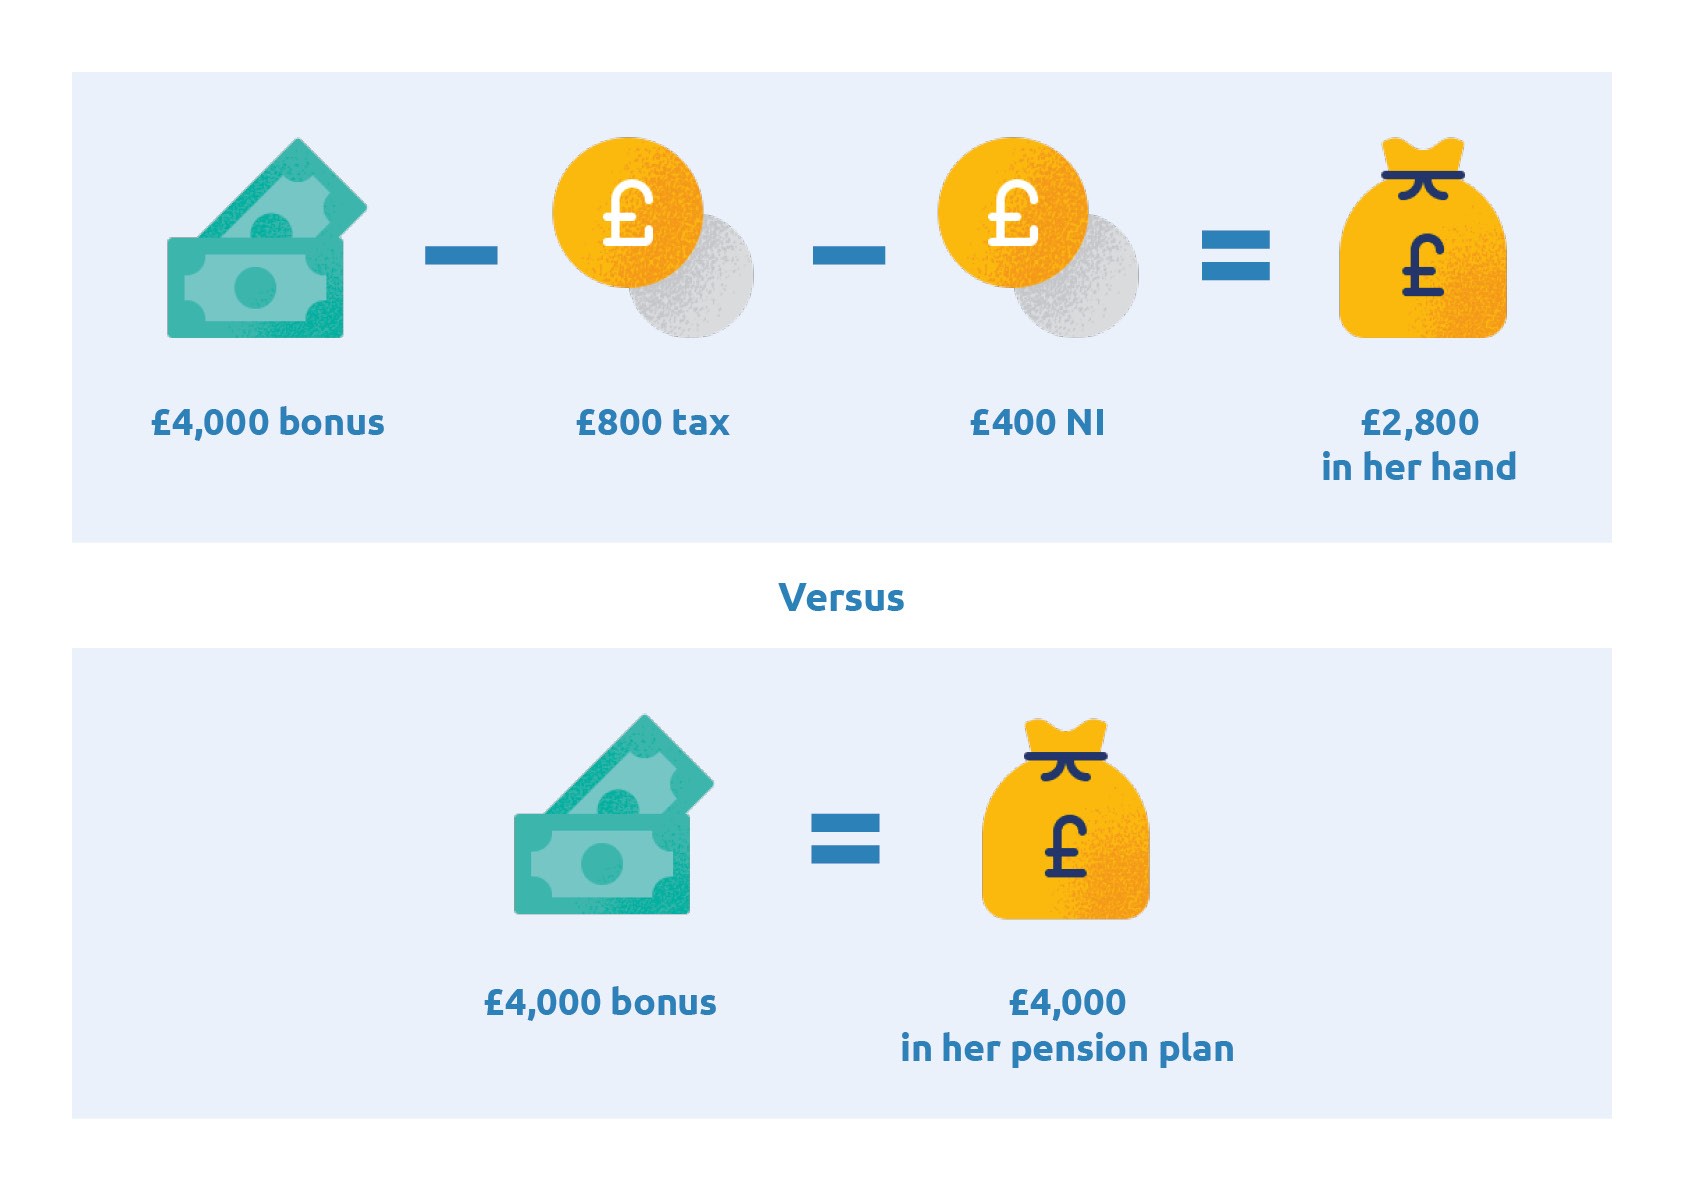 Image showing how much tax and national insurance would be paid on a £4,000 bonus